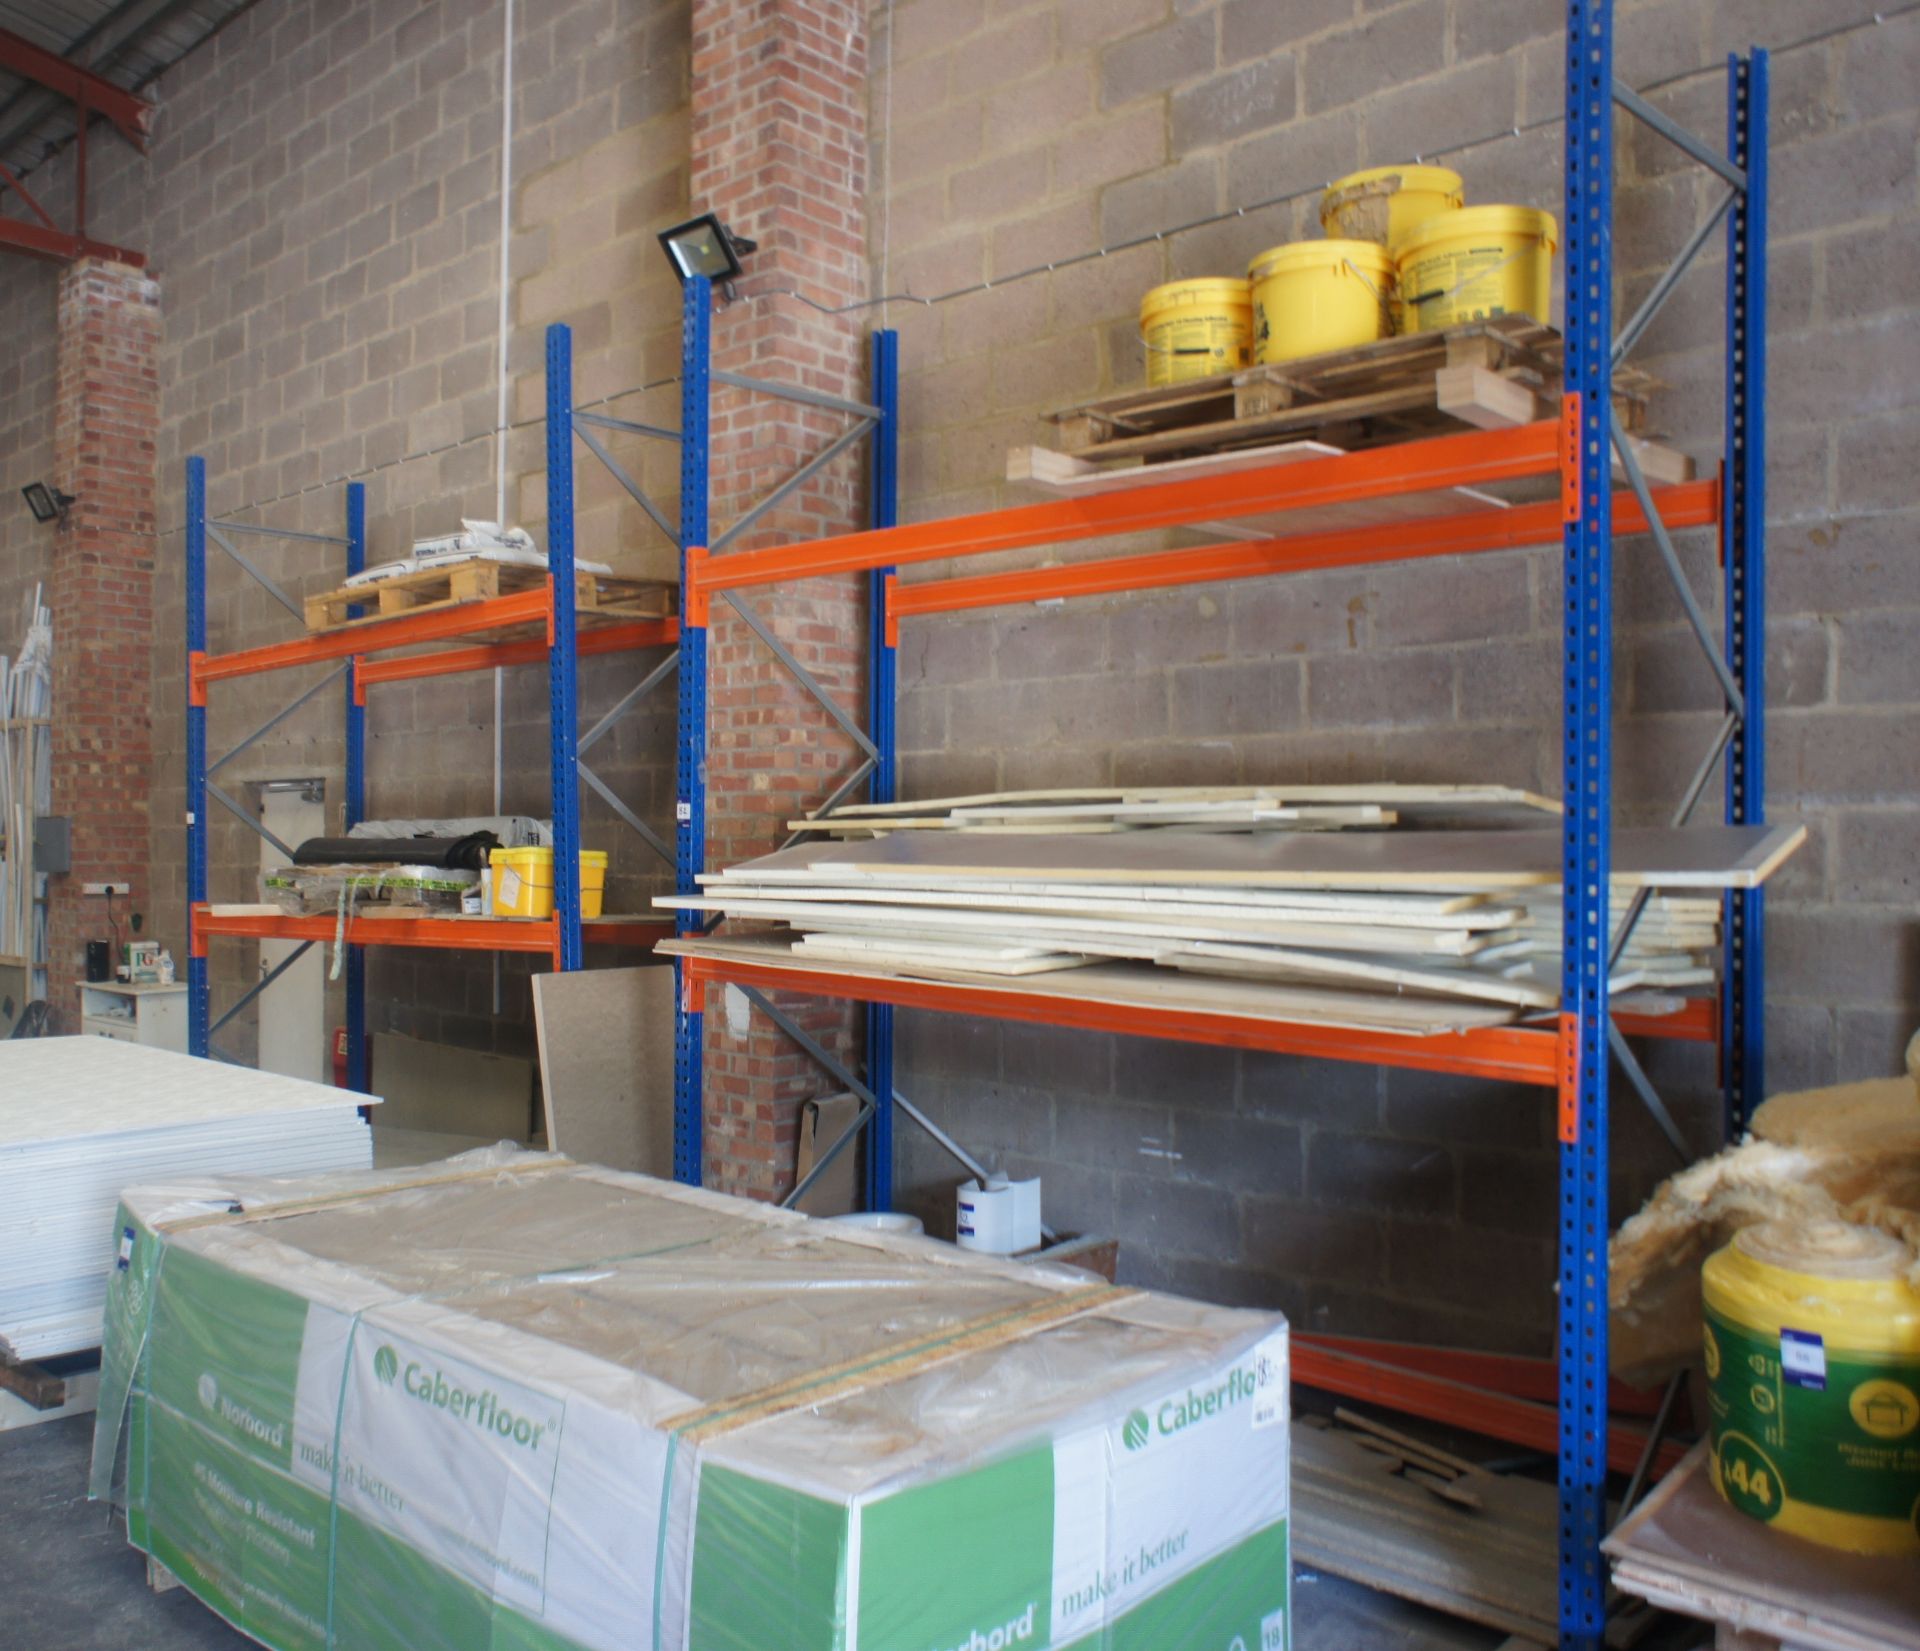 2 Bays Pallet Racking 4 Uprights 3.5m, 10 Crossbeams including 4 Bags Cement, 5 Rolls Visqueen, 5 - Image 7 of 7